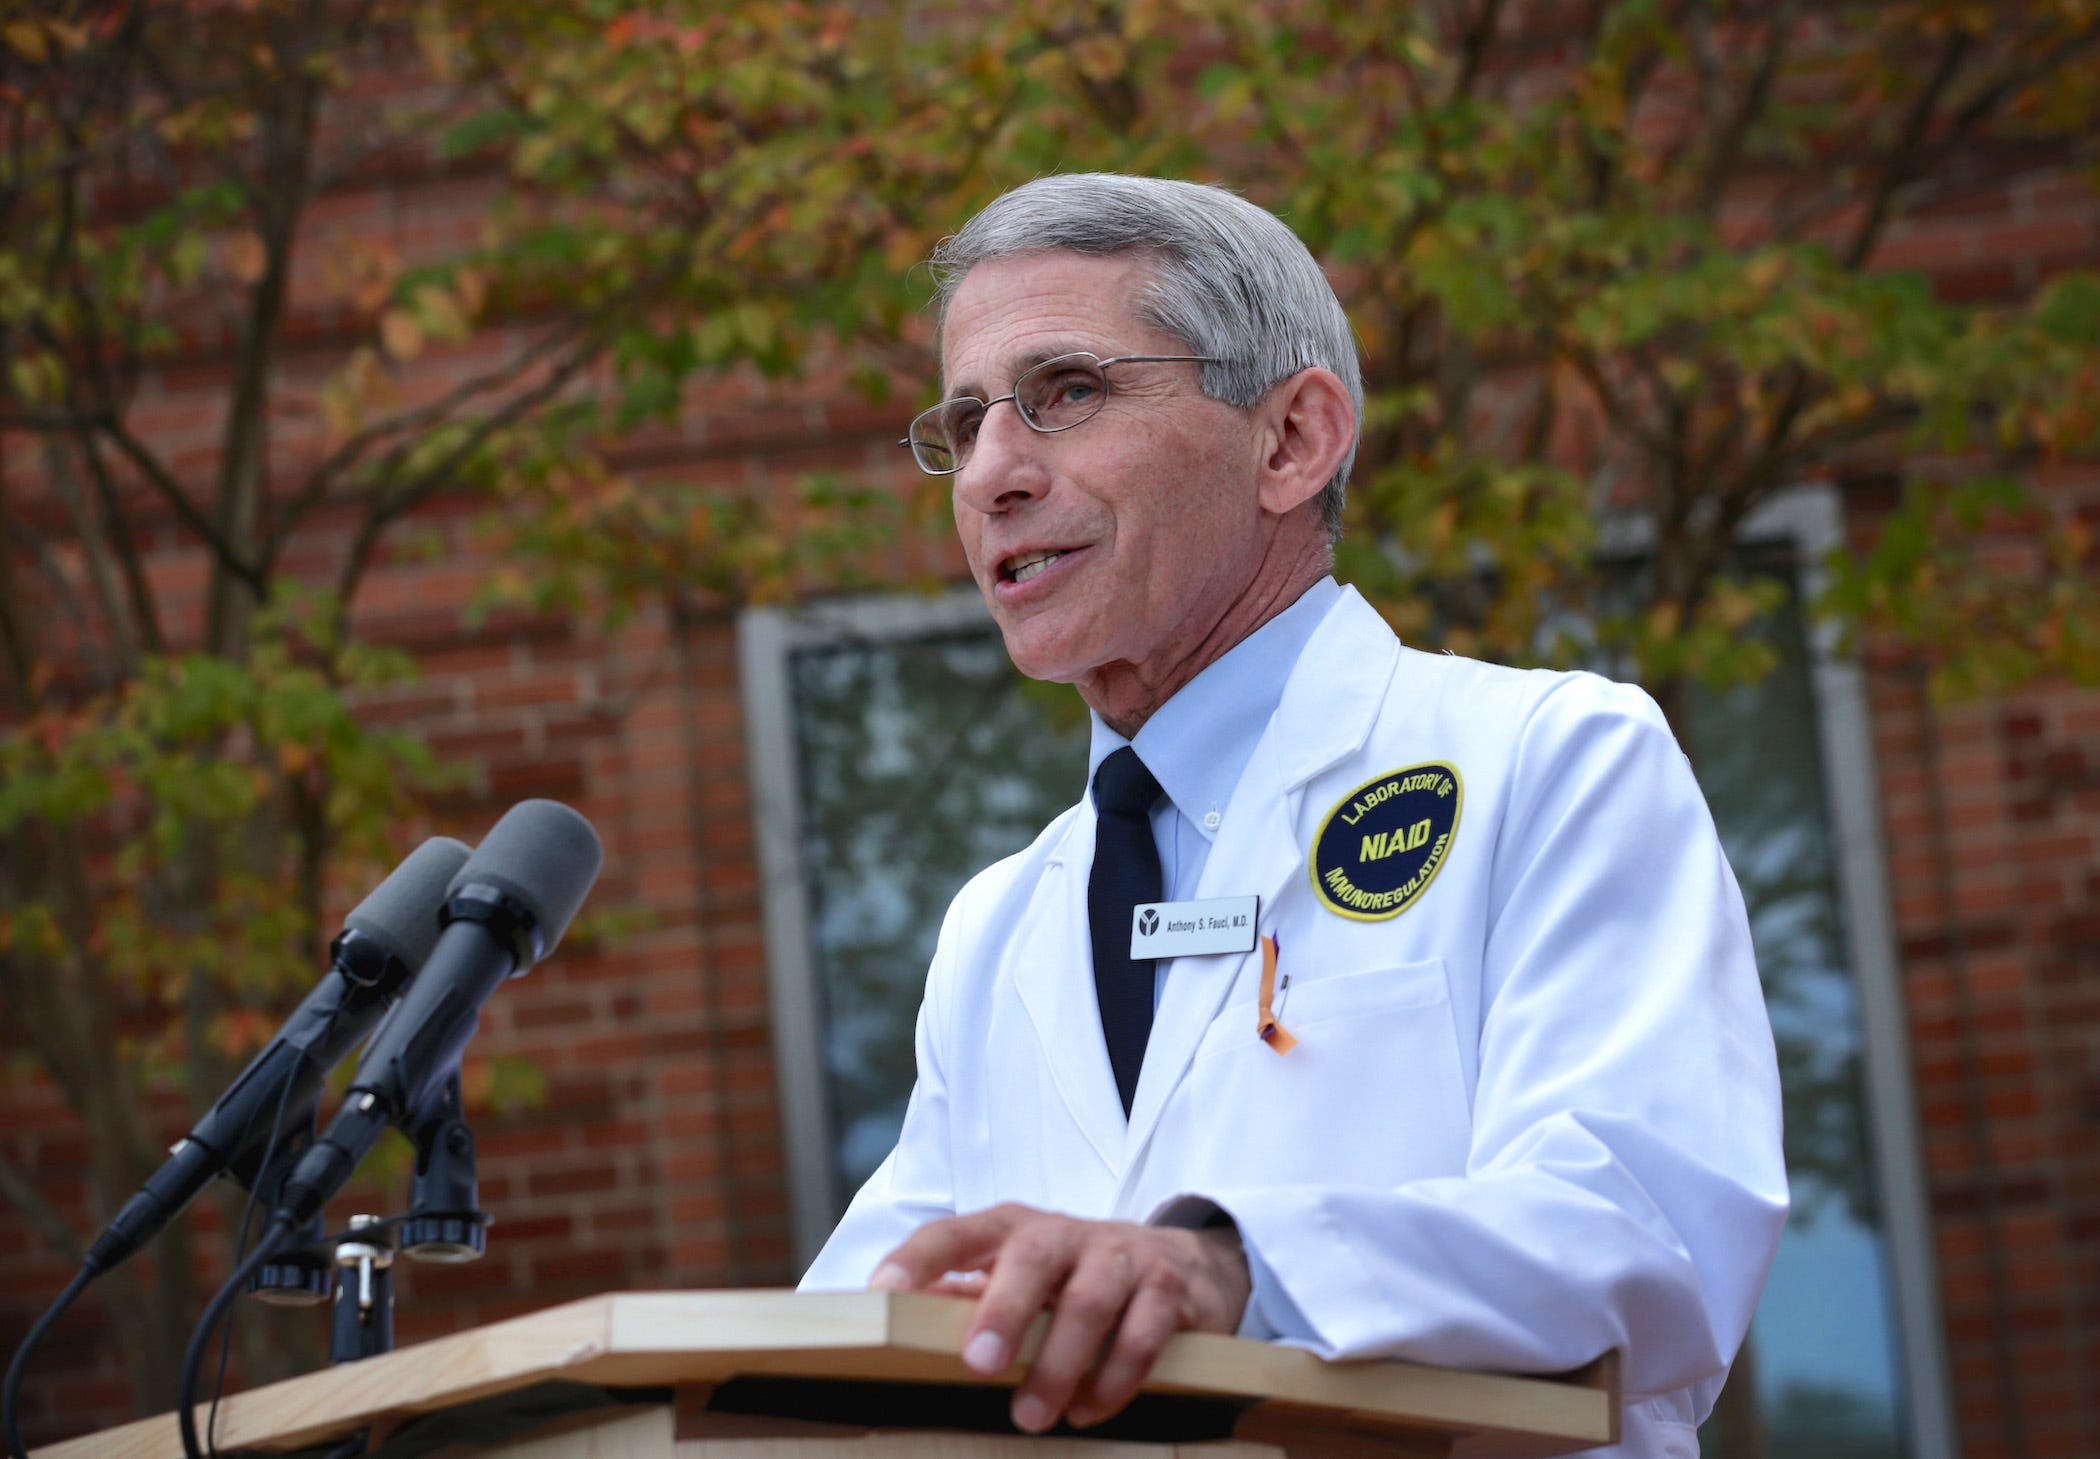 Dr. Anthony Fauci, Director of the National Institute of Allergy and Infectious Diseases, speaks to members of the media at the National Institutes of Health October 24, 2014 in Bethesda, Maryland.